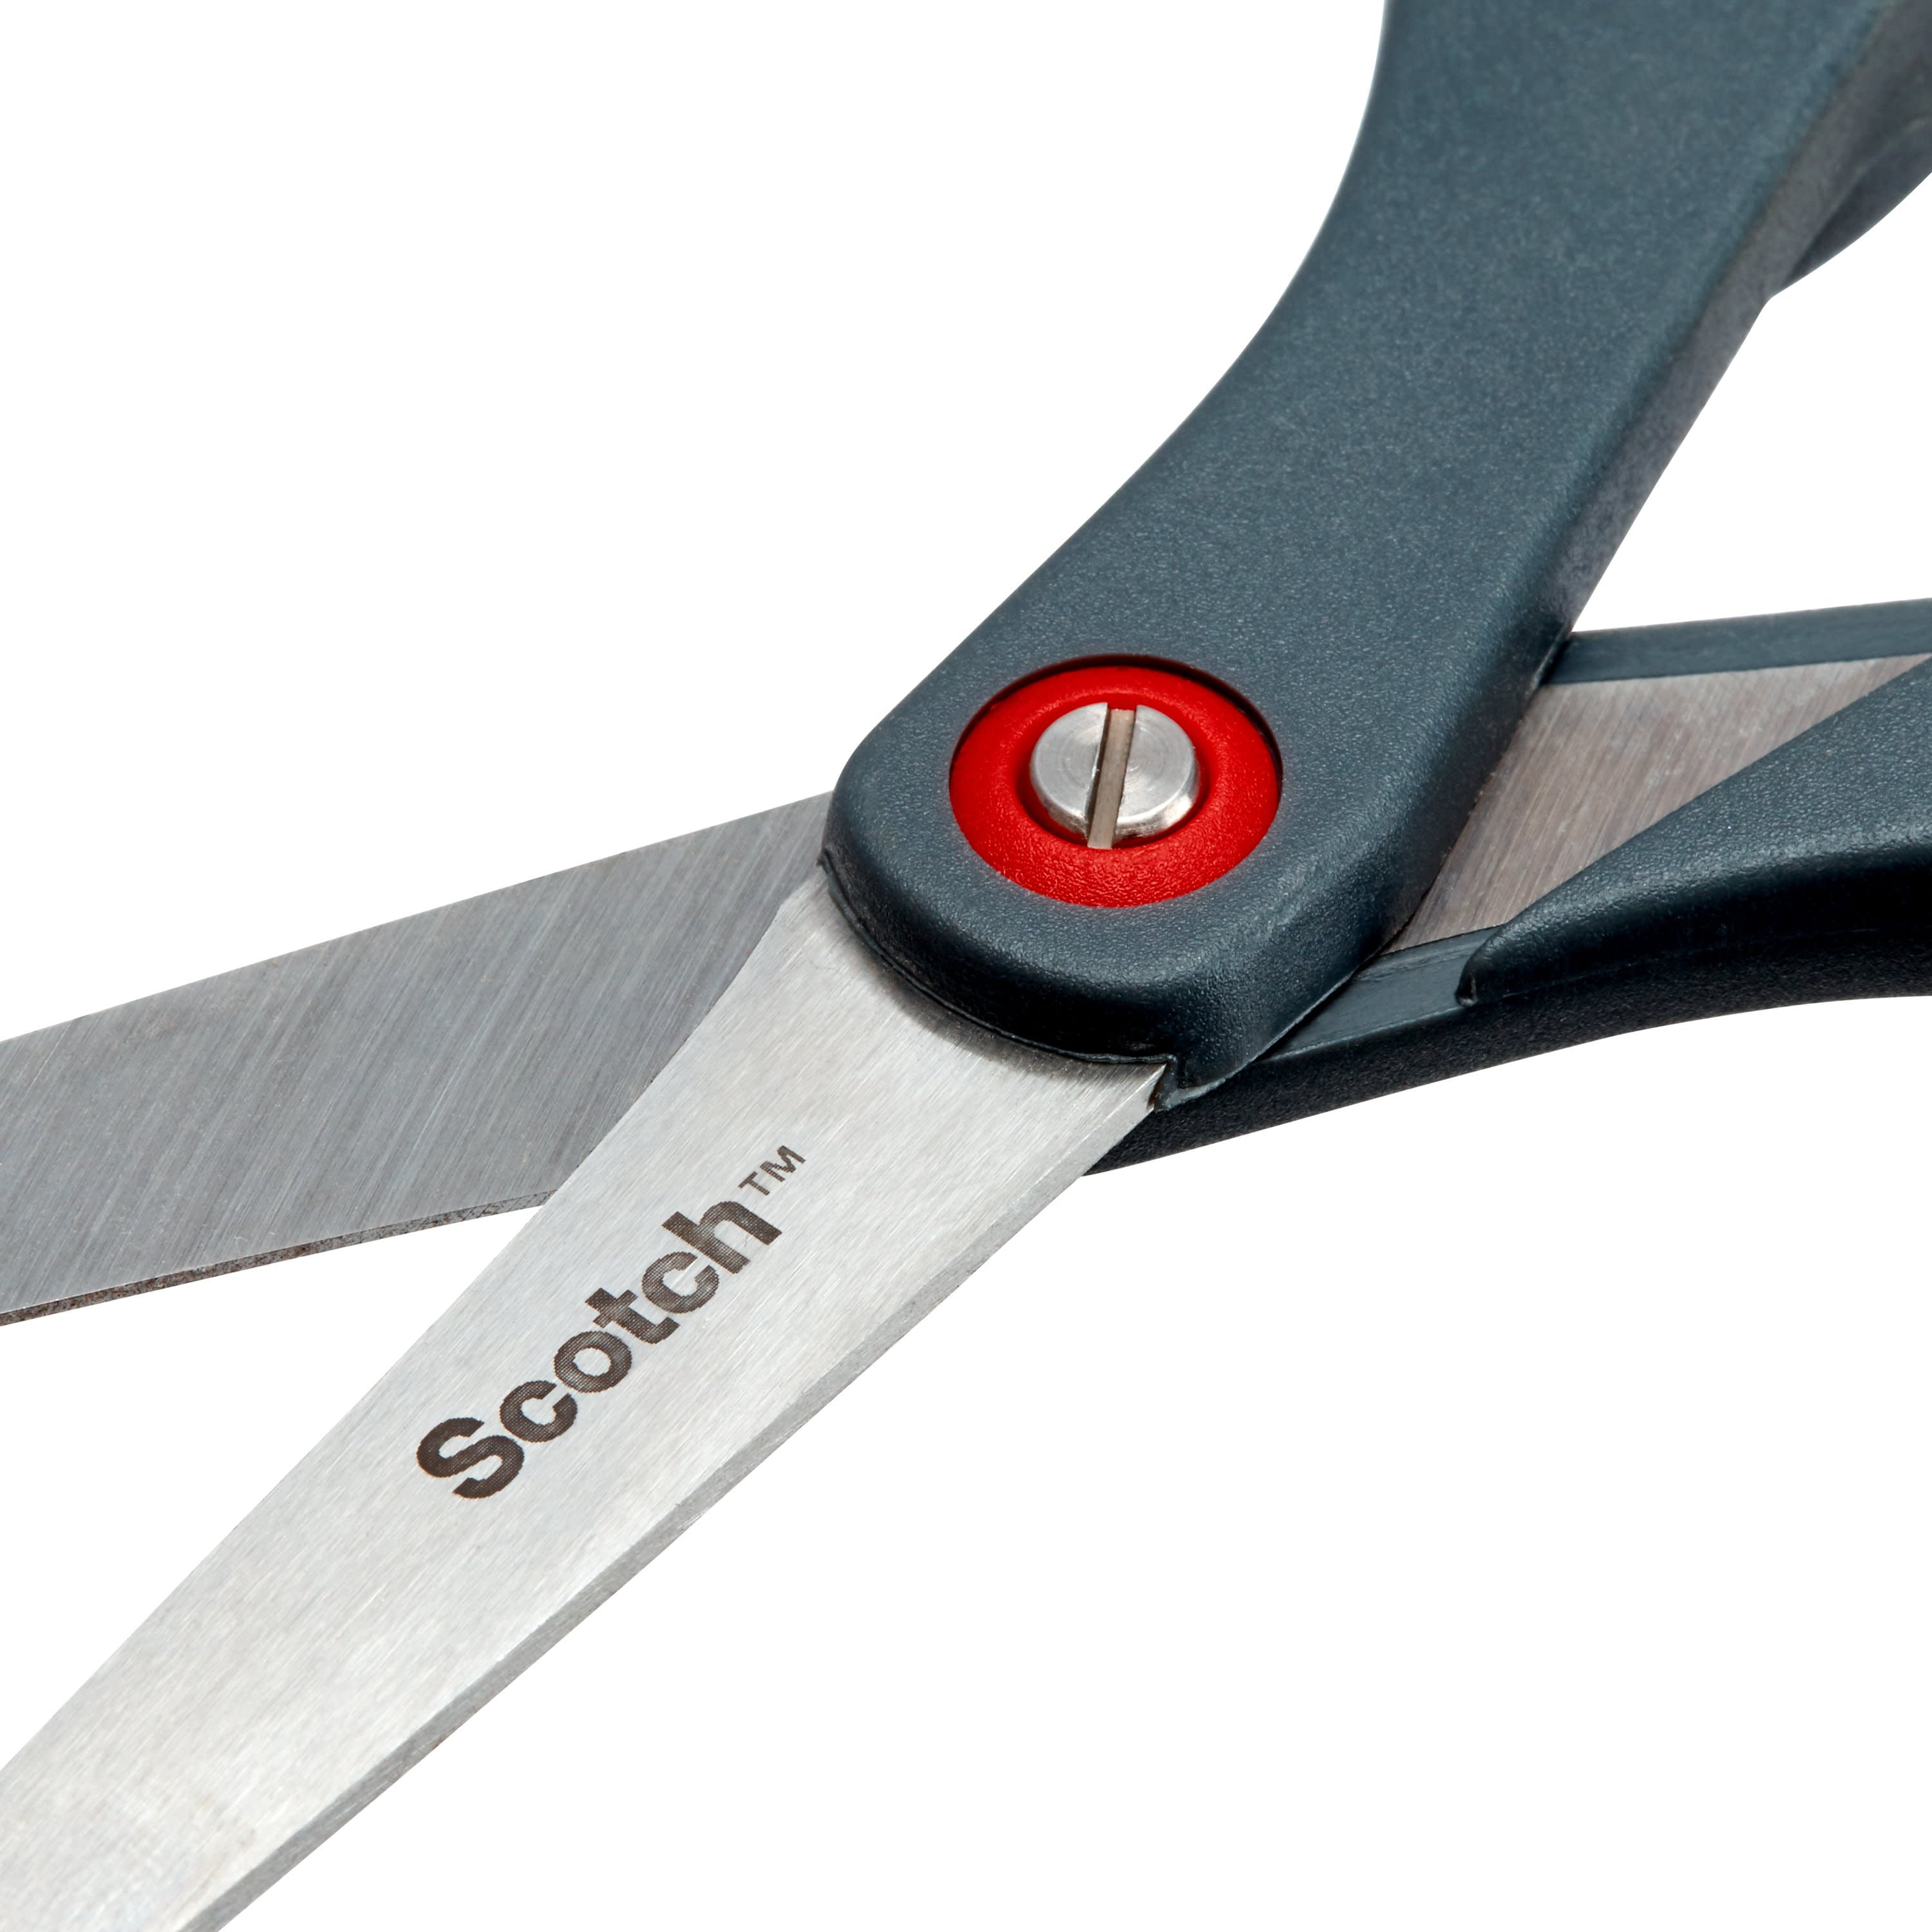 3M 1445 Scotch Precision Detailed 5 Inch Scissors – Value Products Global